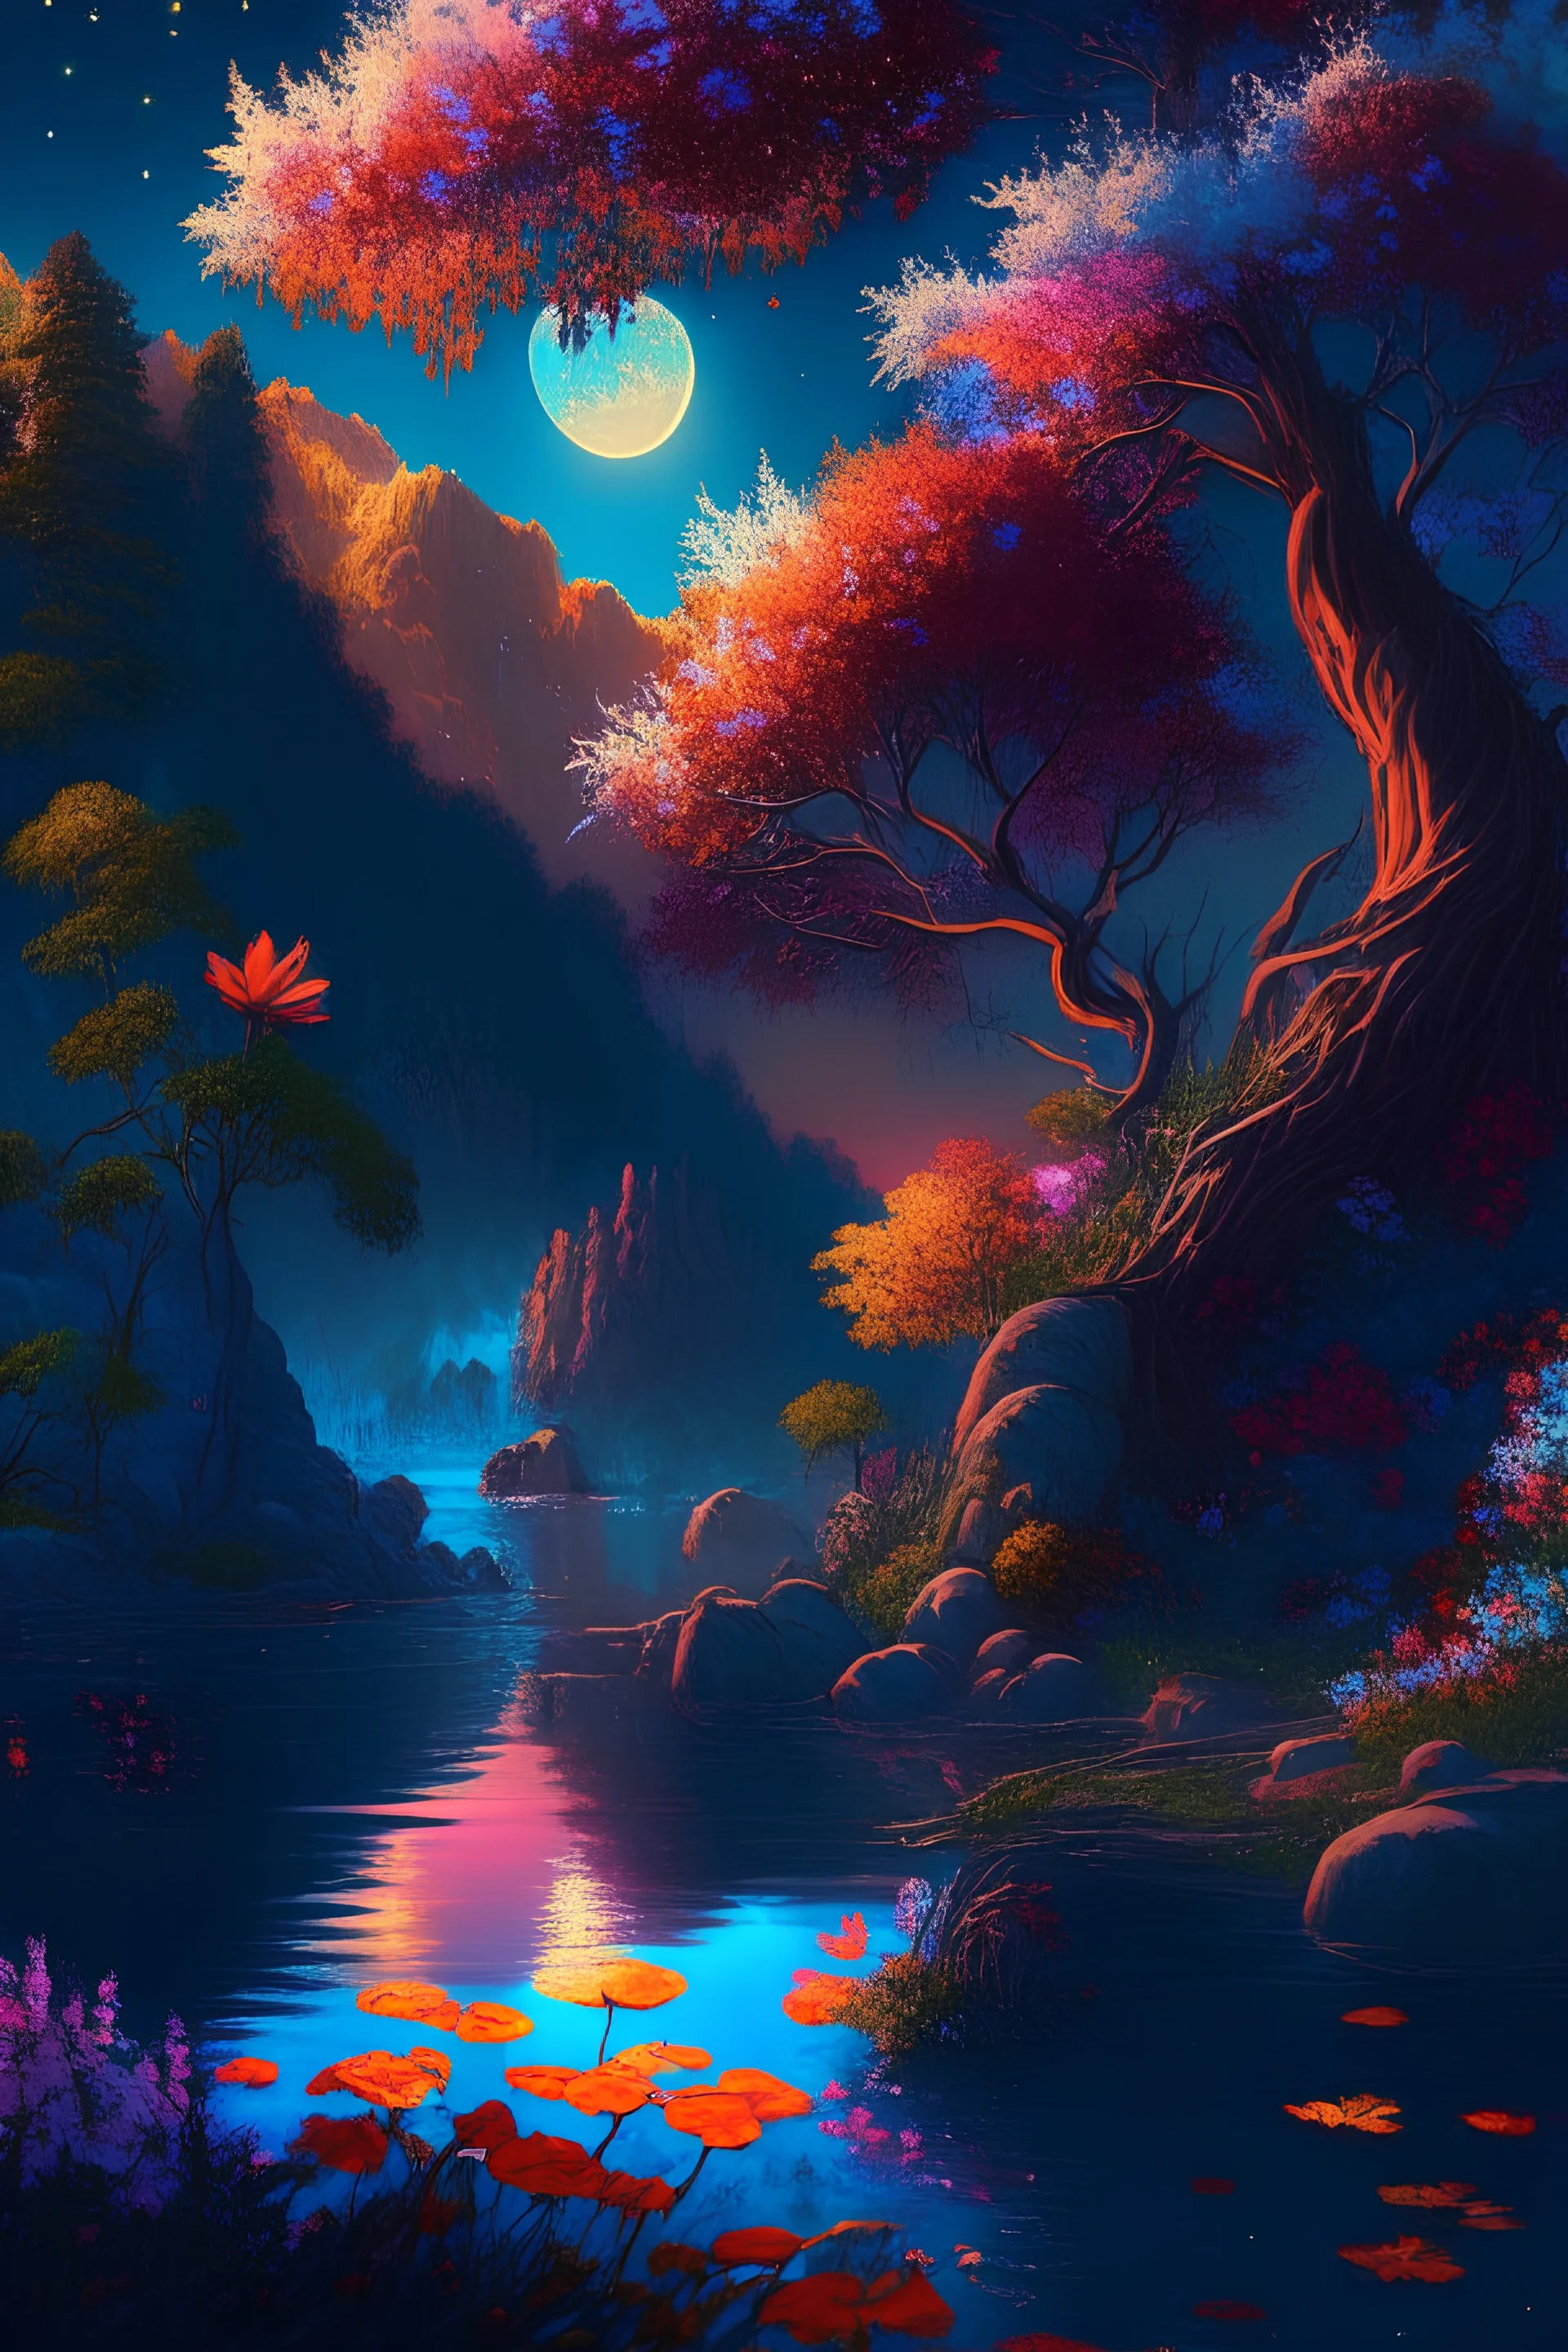 trees, river, day, sun day, an idyliic forest with bright colorful flowers, mountains, sun,flower, a small river, paradise, heavenly atmosphere in the moonlit night, detailed painting, deep color, fantastucal, intricate details, splash screen, complementary colors, fantasy concept art, 16K resolution, artstation unreal engine 5, night cafe, stable diffusion